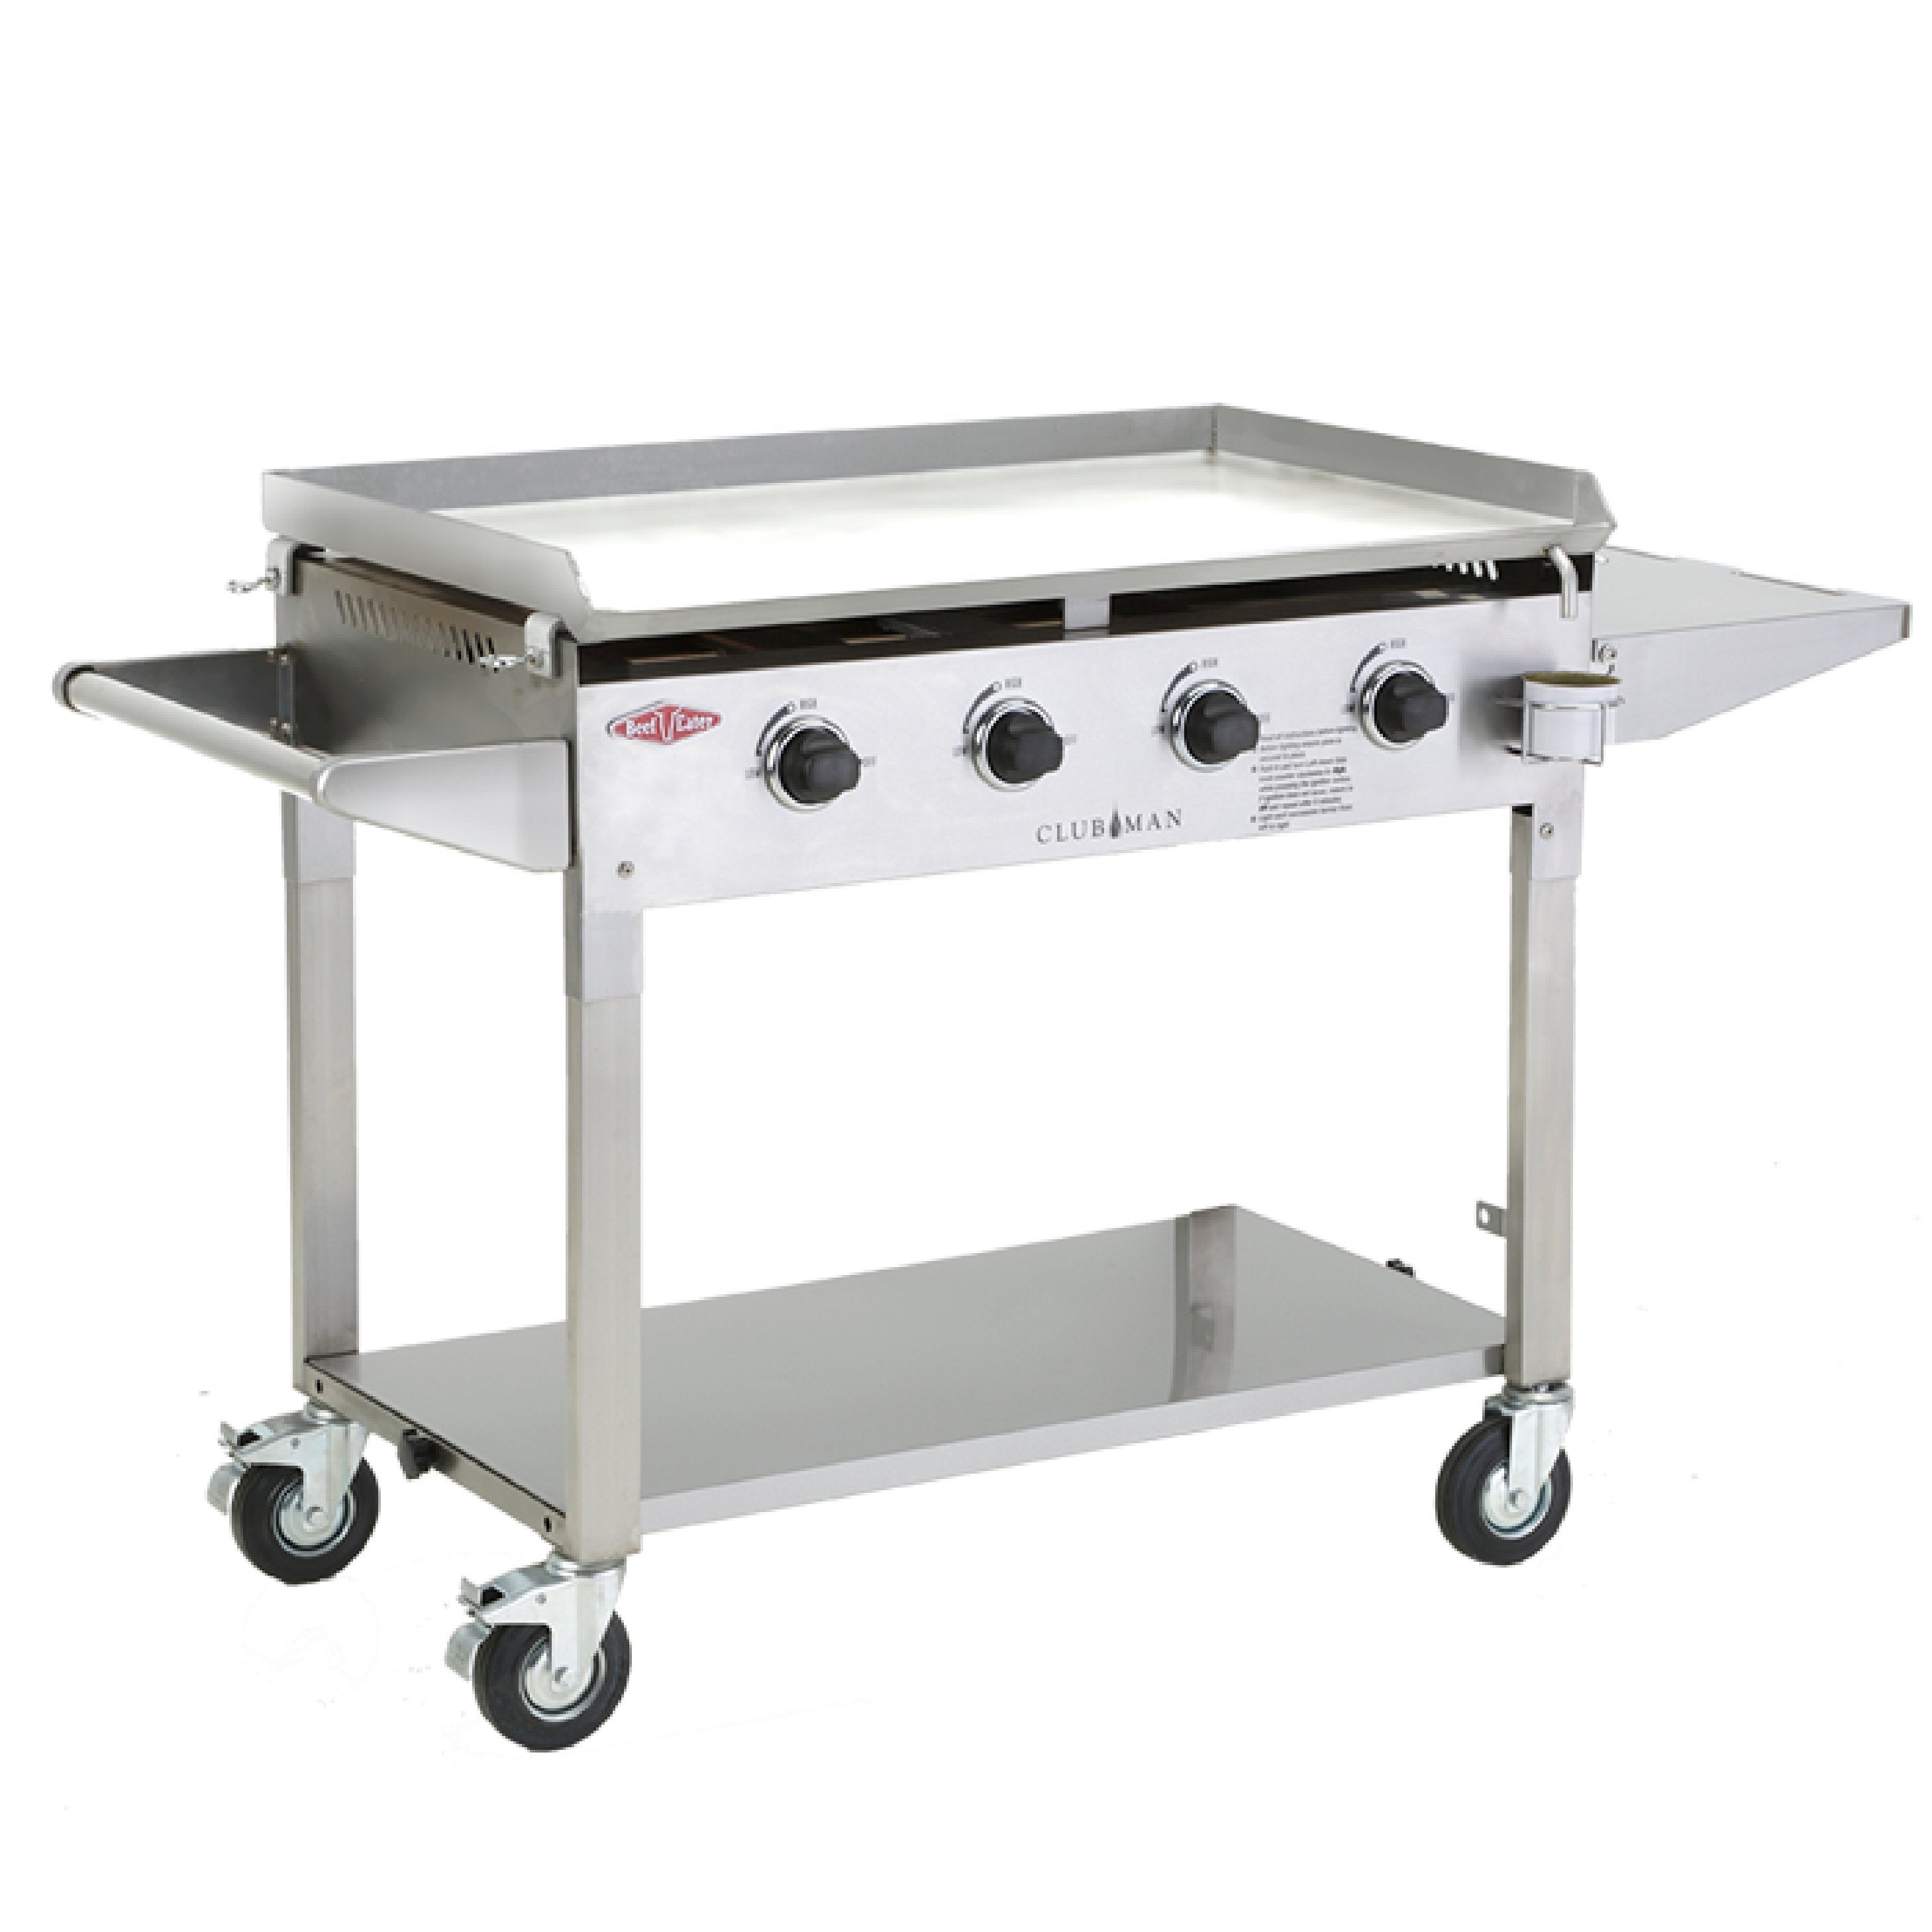 Beefeater Clubman Stainless Steel All Plate BBQ, BBQ, Beefeater